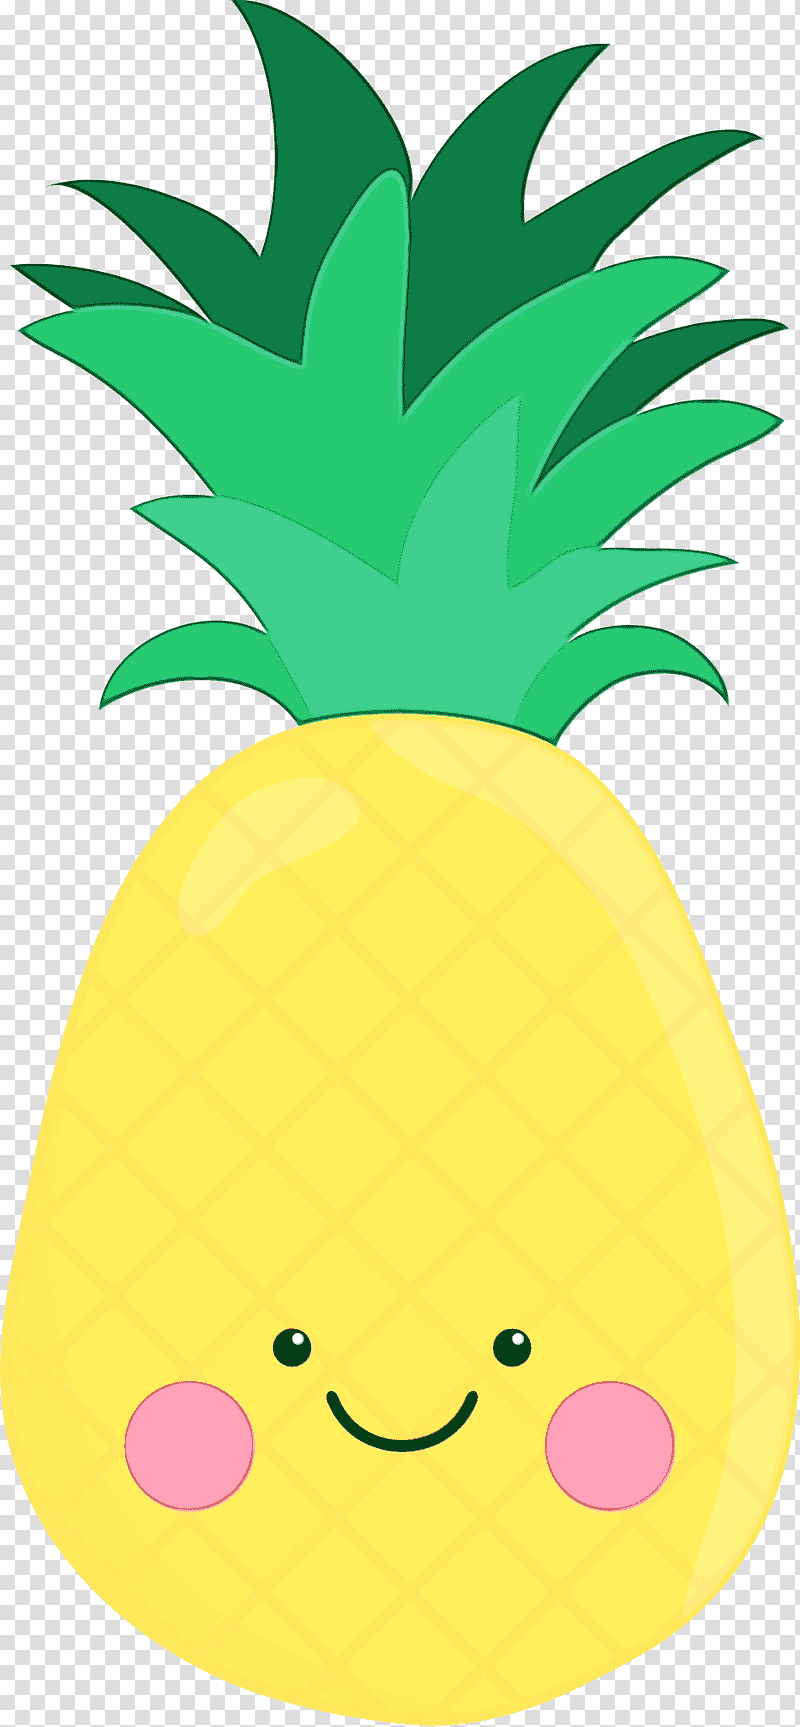 Pineapple, Watercolor, Paint, Wet Ink, Cartoon, Yellow, Fruit transparent background PNG clipart